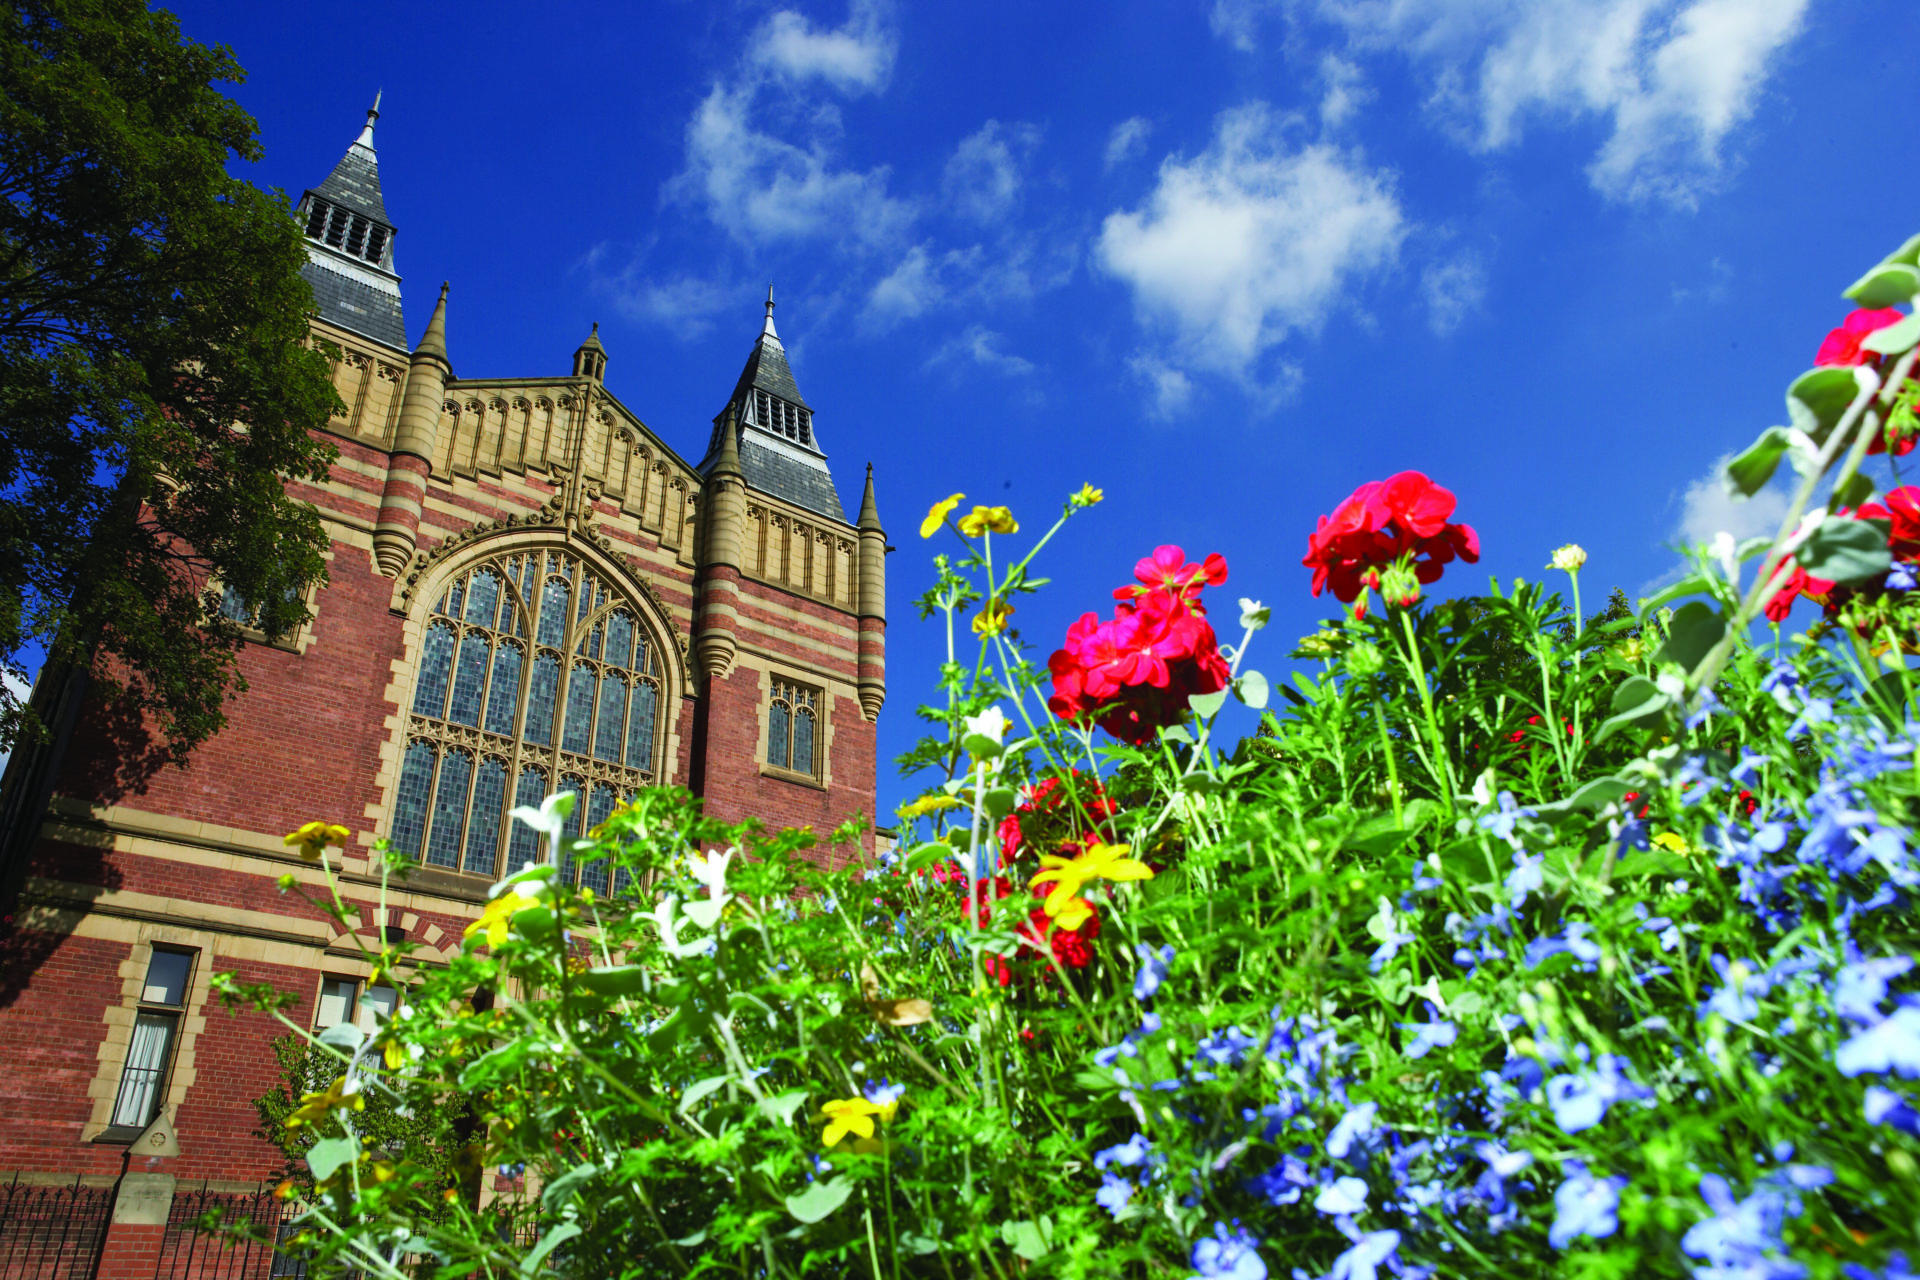 Flowers in front of a blue sky and the Great Hall at the University of Leeds